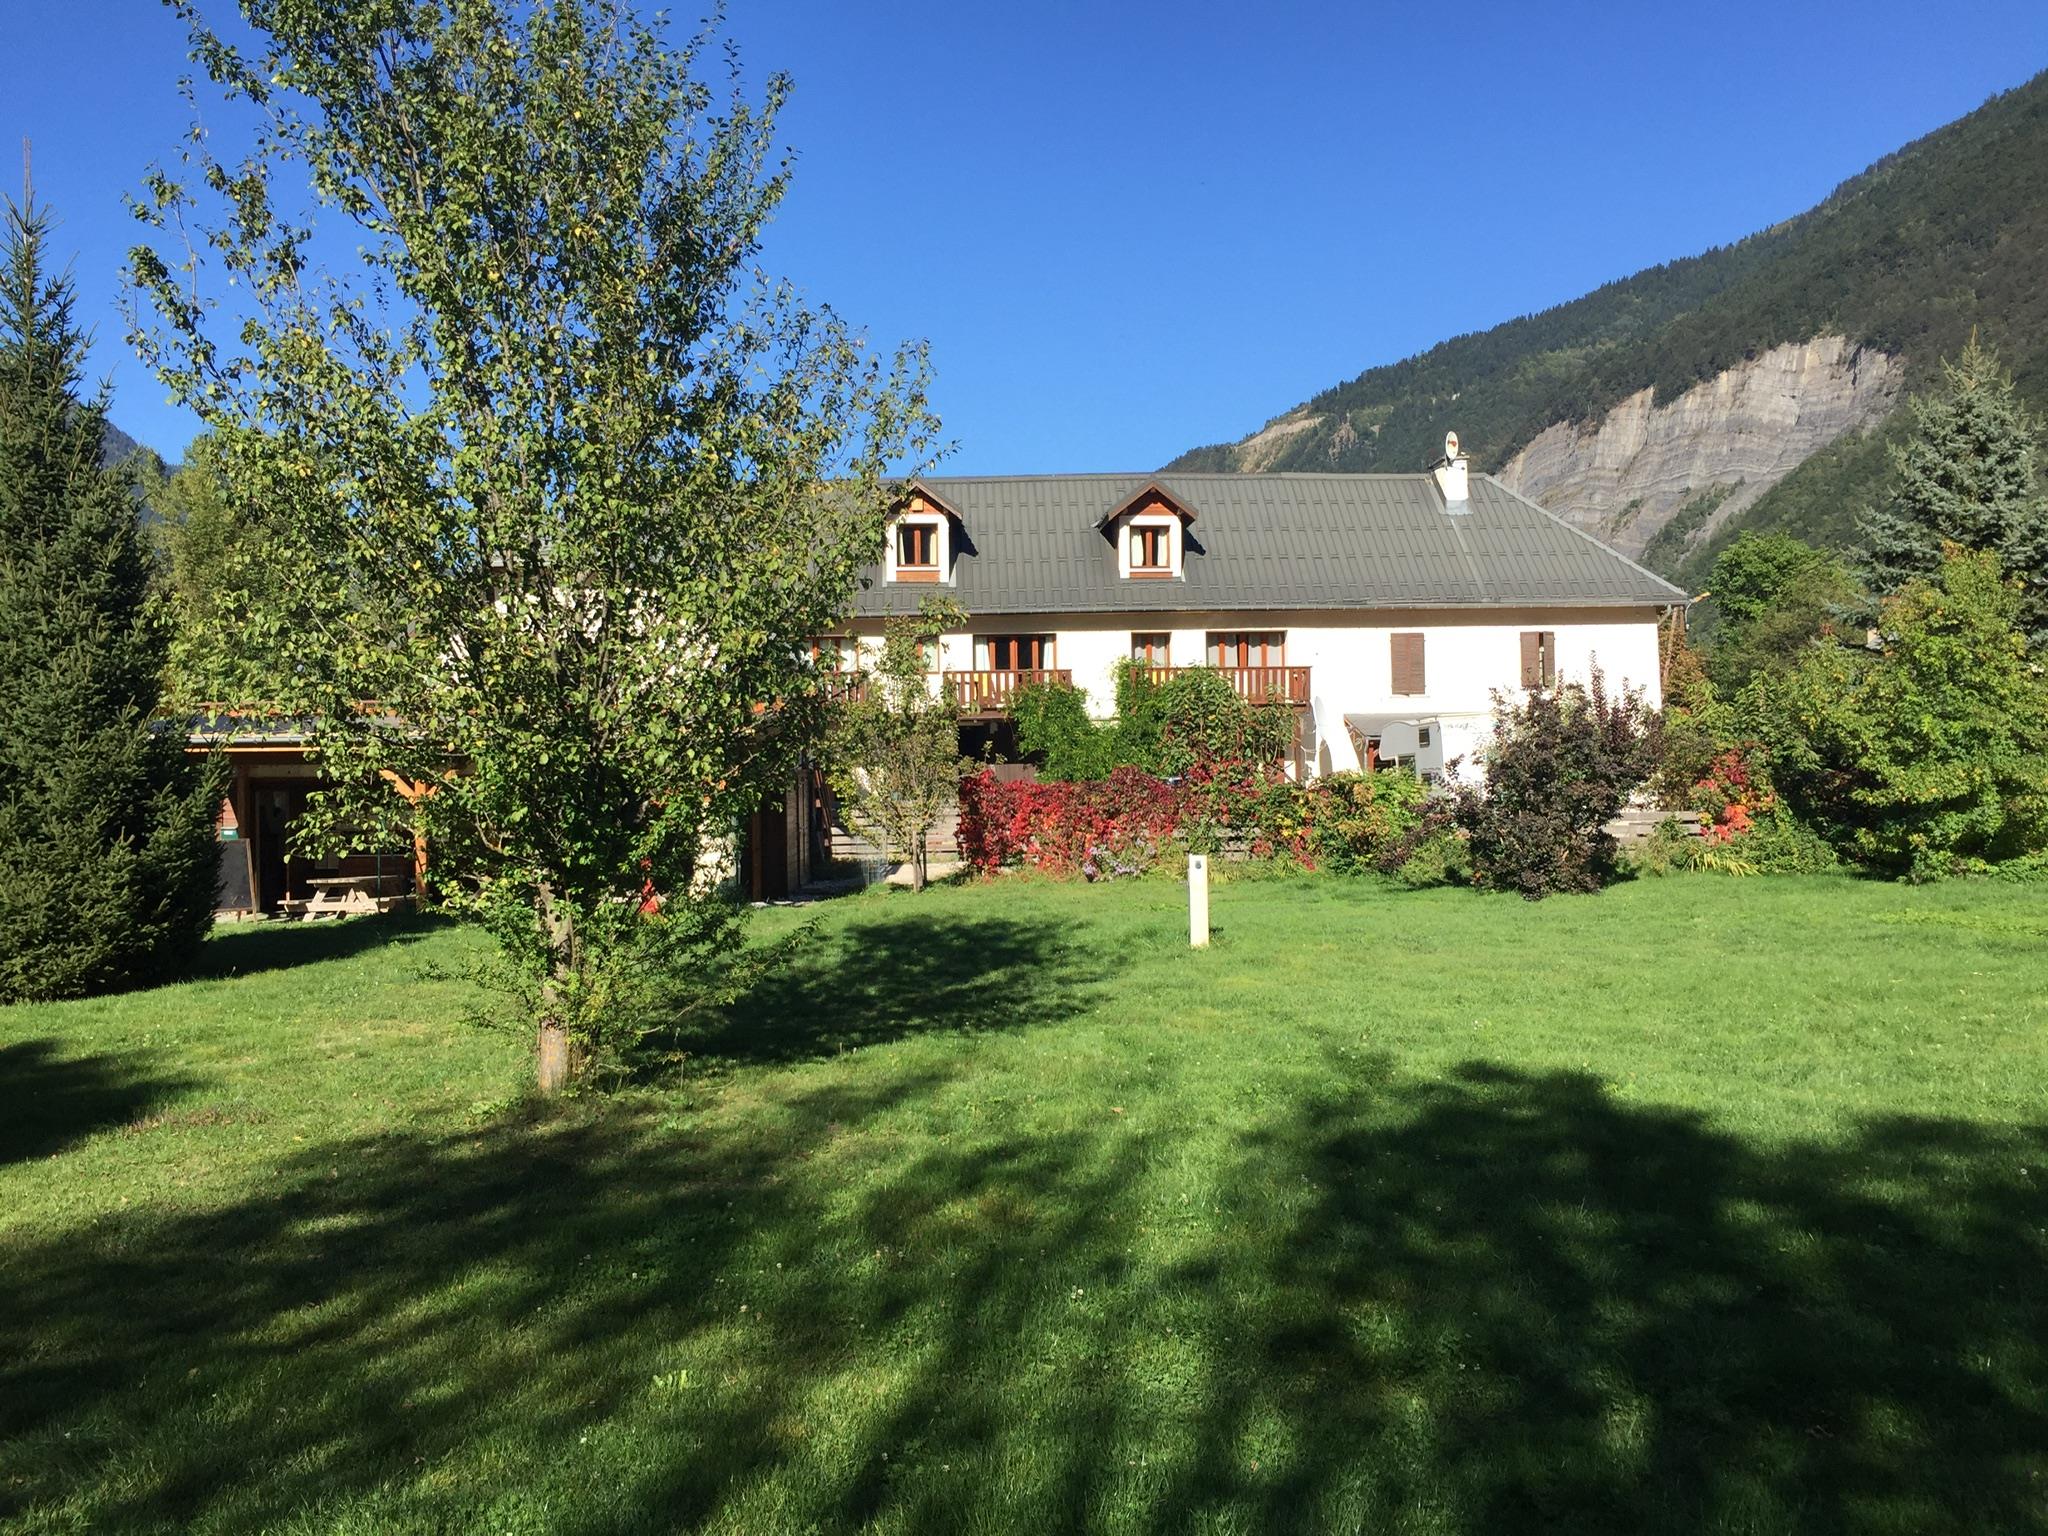 Accommodation - End Barn : One Of Our Properties At Ferme Noemie, Bourg D'oisans. - Camping la Ferme Noémie